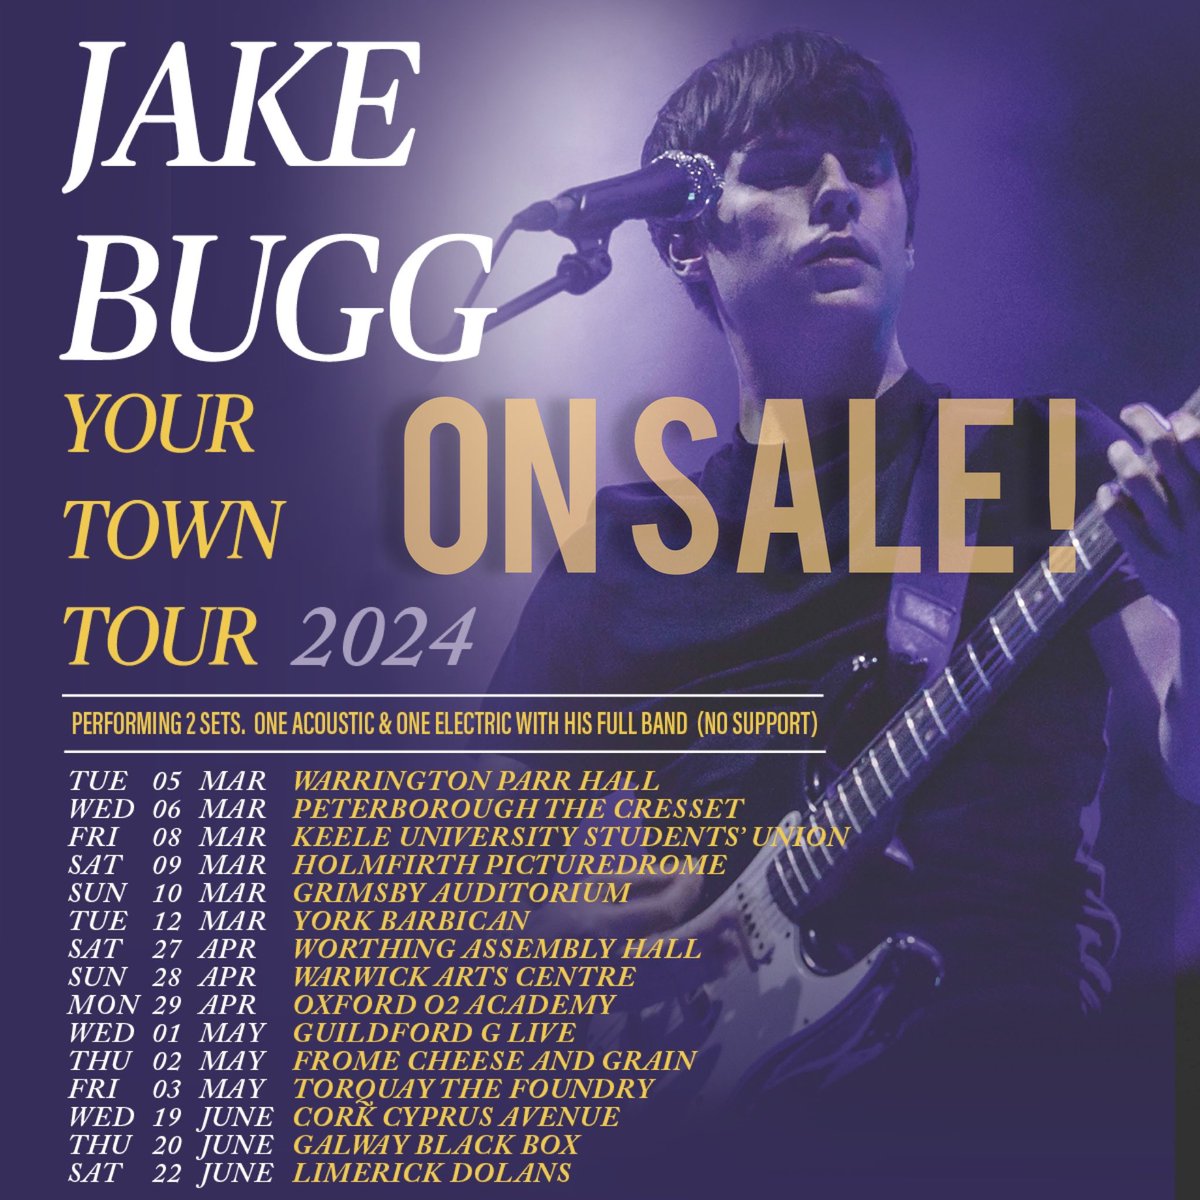 2024 tour dates on sale now- I’ll be playing two sets, one acoustic and one full band. Looking forward to seeing you all!